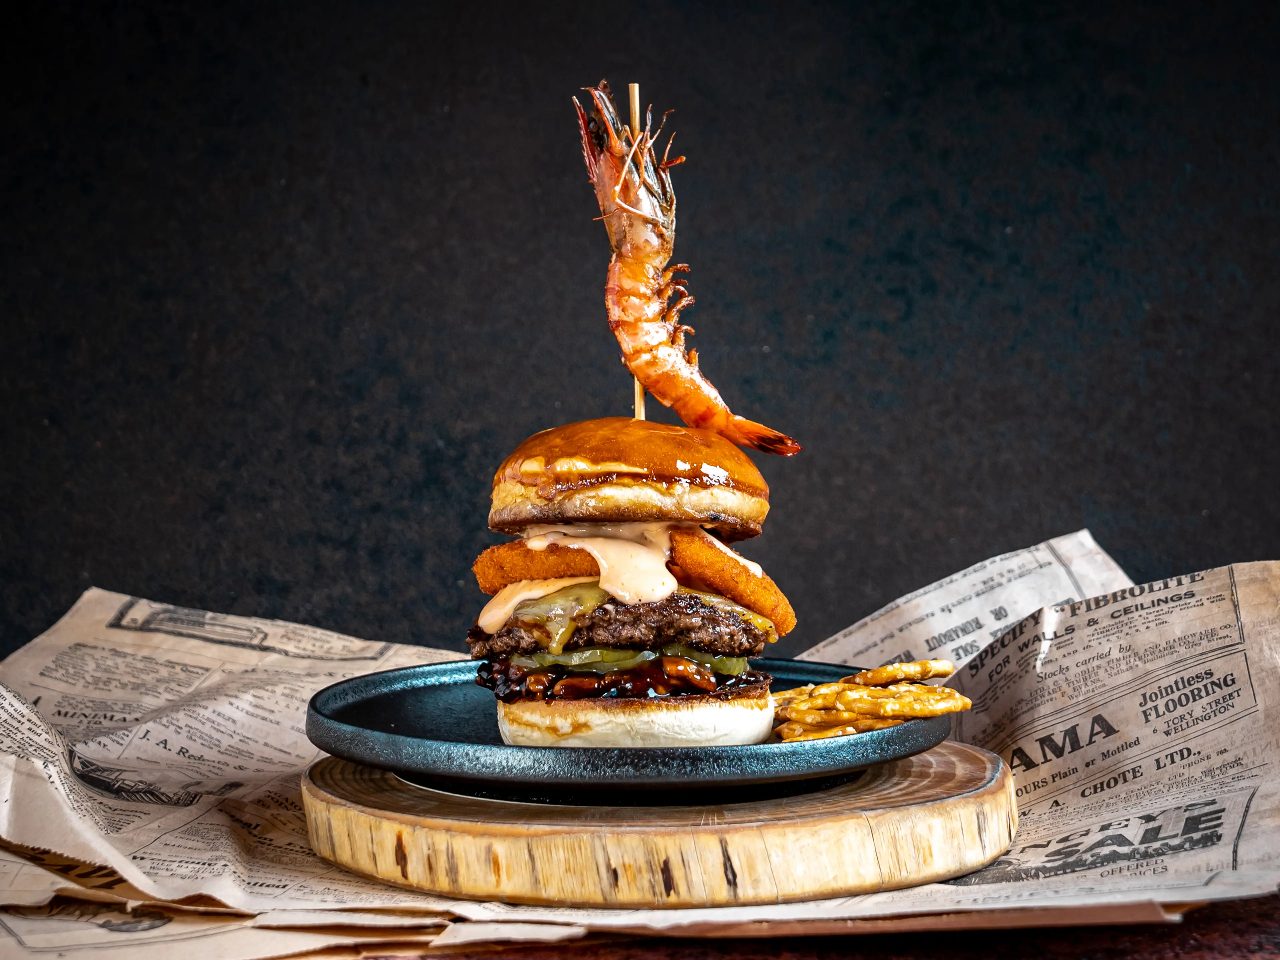 The competition for Wellington's best burger is on and the entries got my tummy rumbling fr